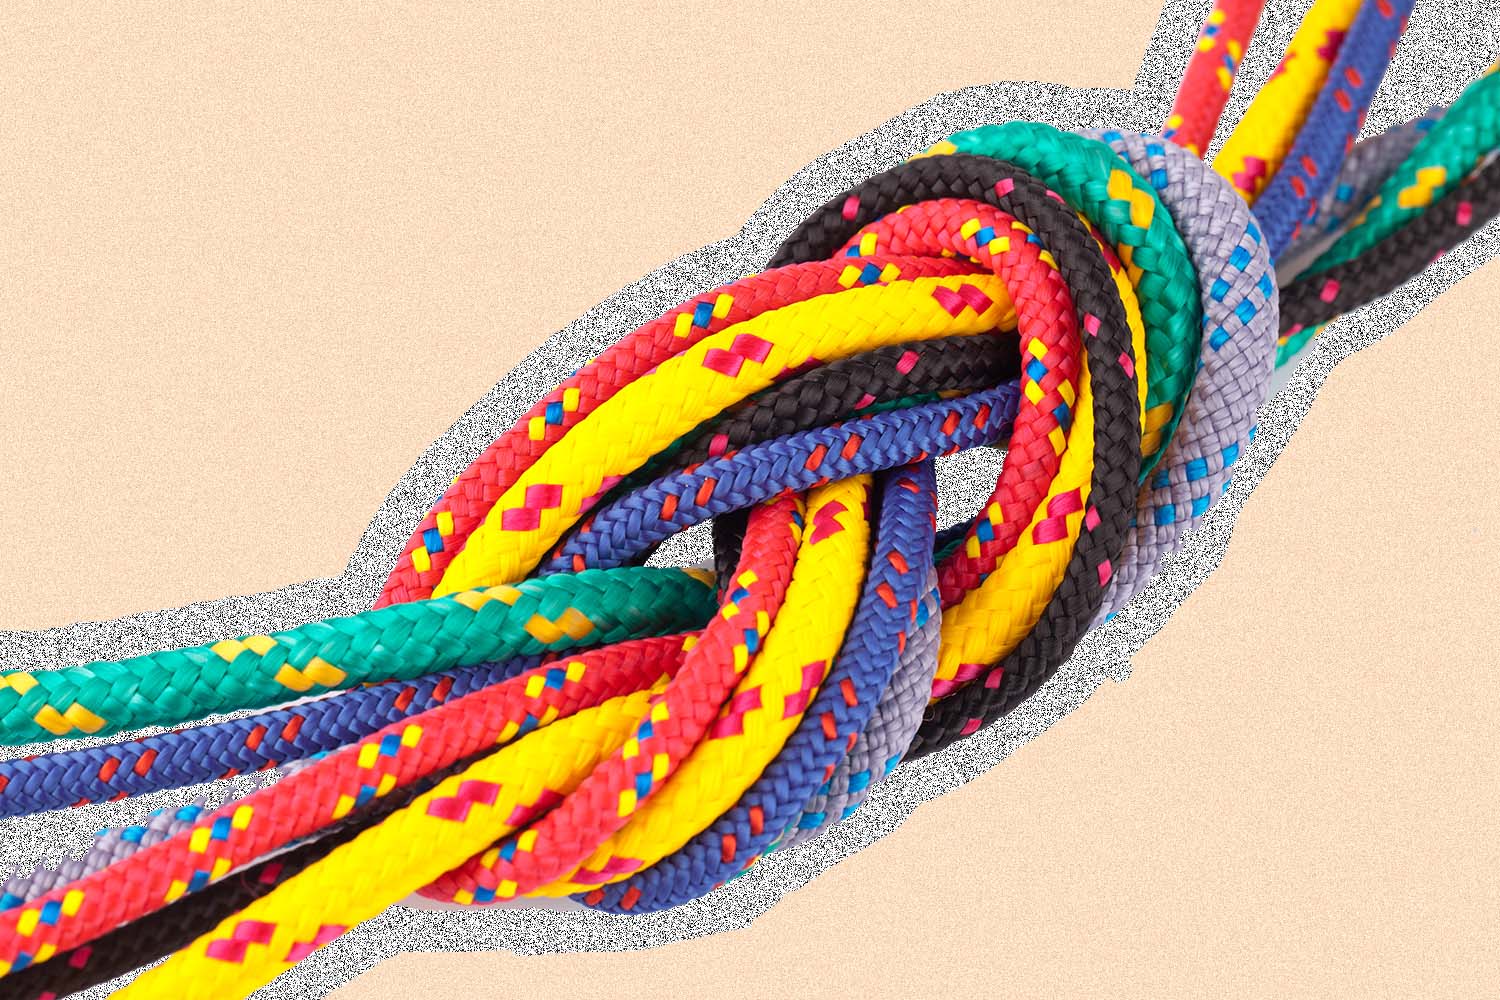 knot made up of many colors